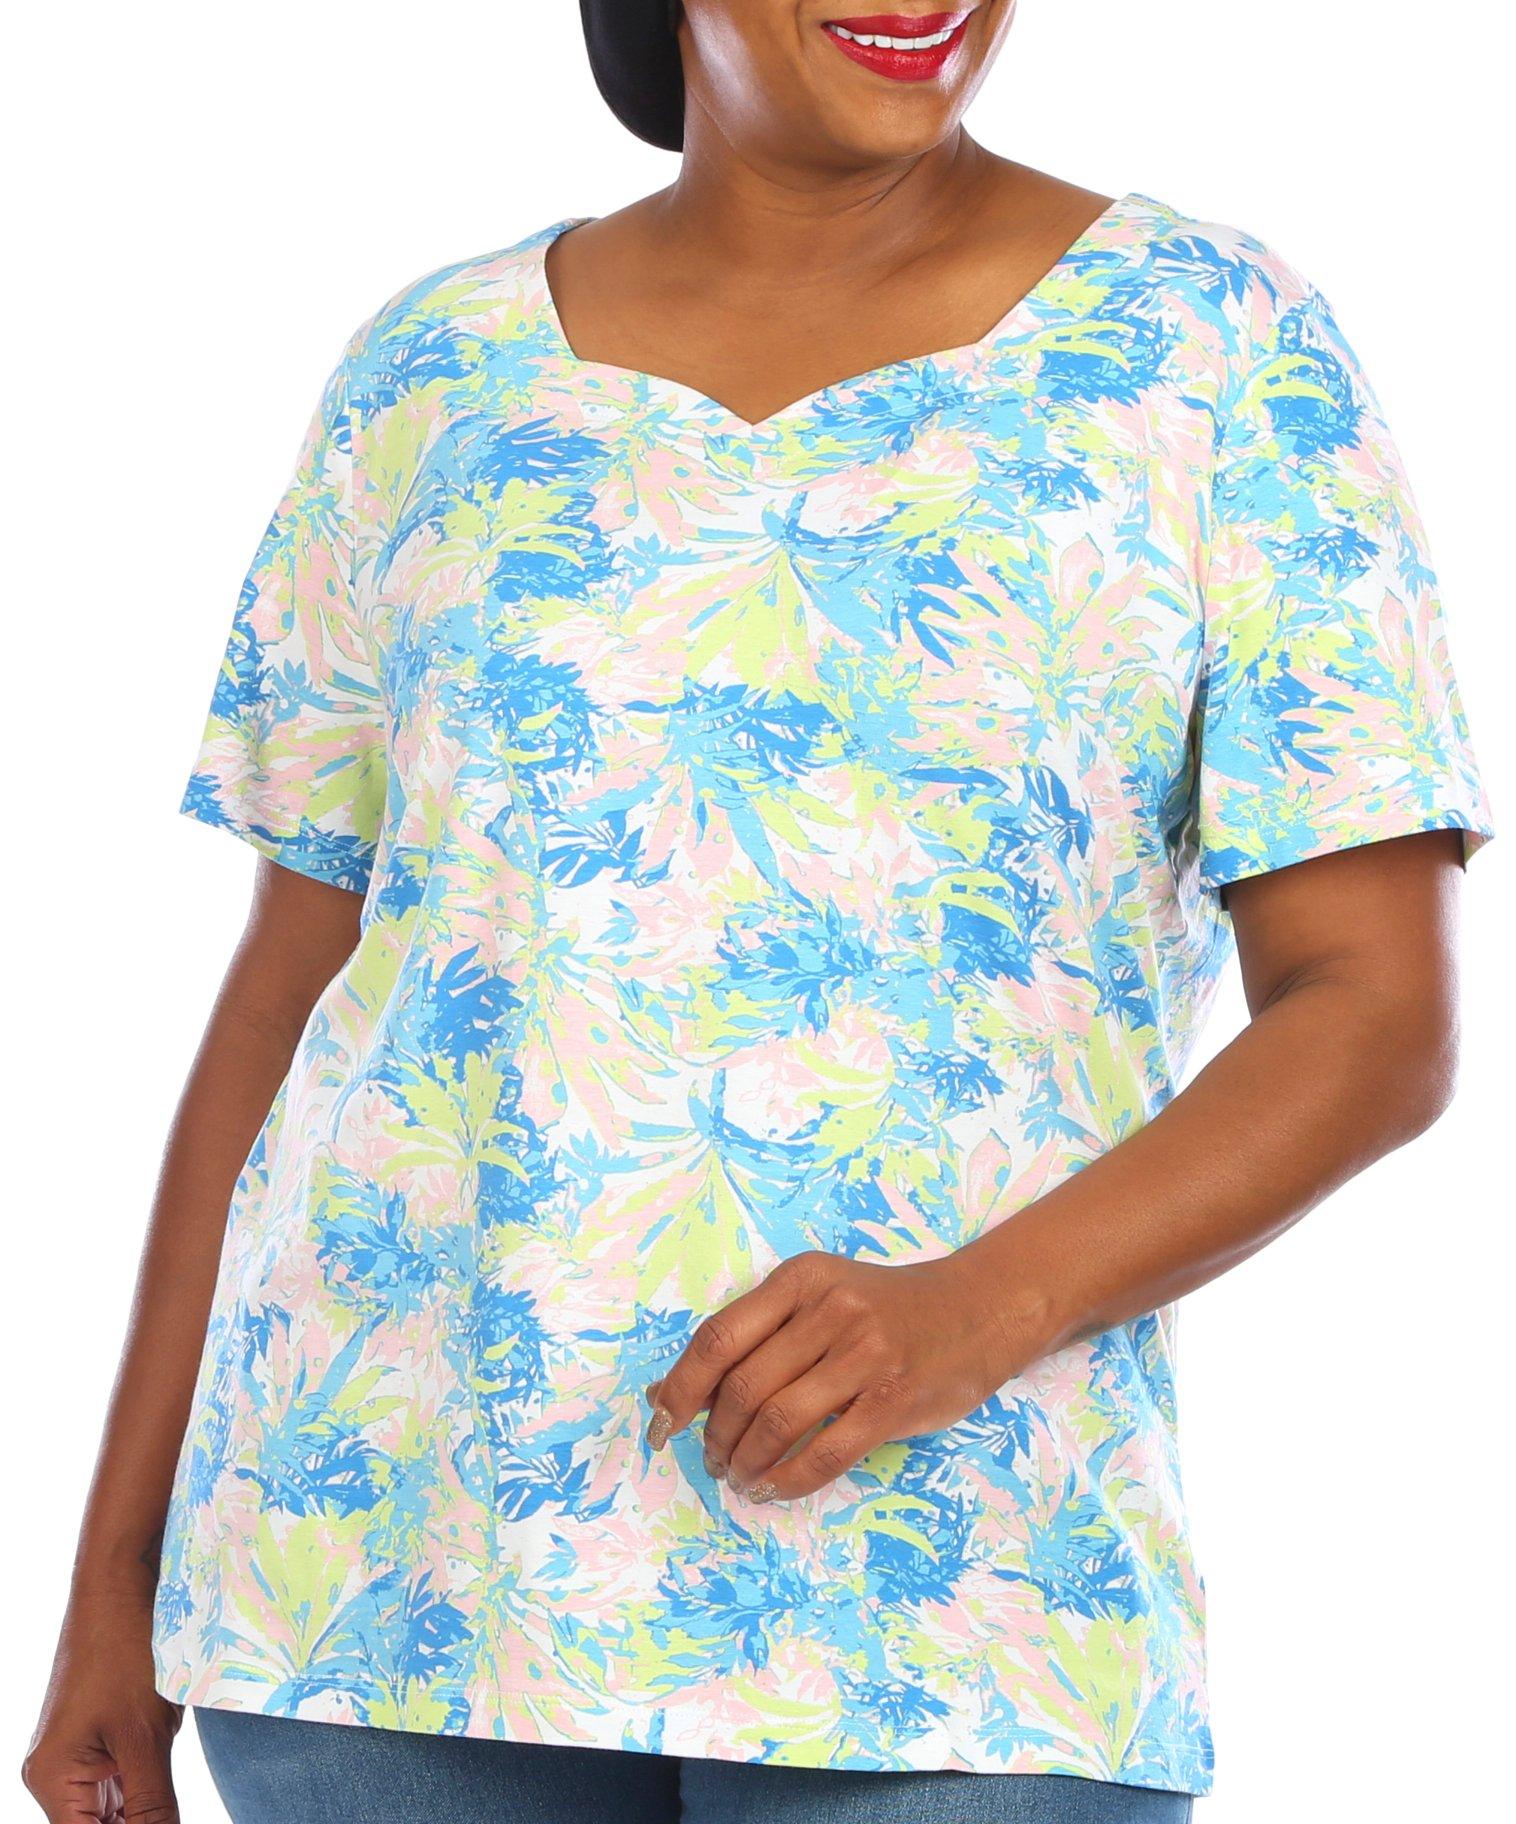 Coral Bay Plus Floral Sweetheart Neck Short Sleeve Top